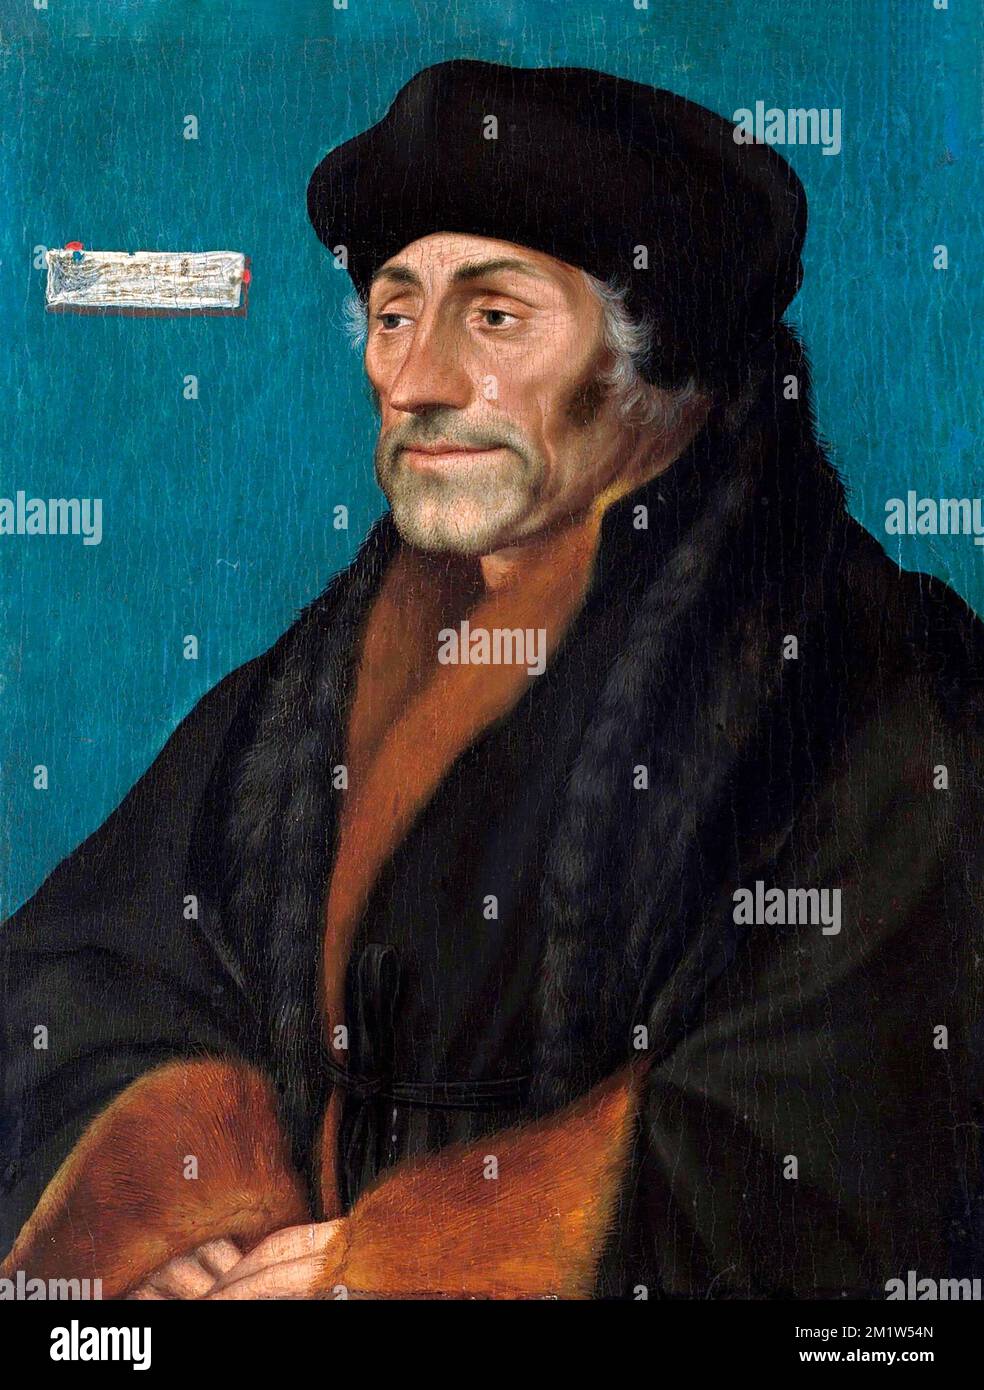 Erasmus. Portrait of Desiderius Erasmus Roterodamus (1466-1536), known as Erasmus of Rotterdam, or simply Erasmus, a Dutch Renaissance humanist, Catholic priest, social critic, teacher, and theologian. Painting by Hans Holbein the Younger (c. 1497-1543), oil on linden panel, c. 1532 Stock Photo